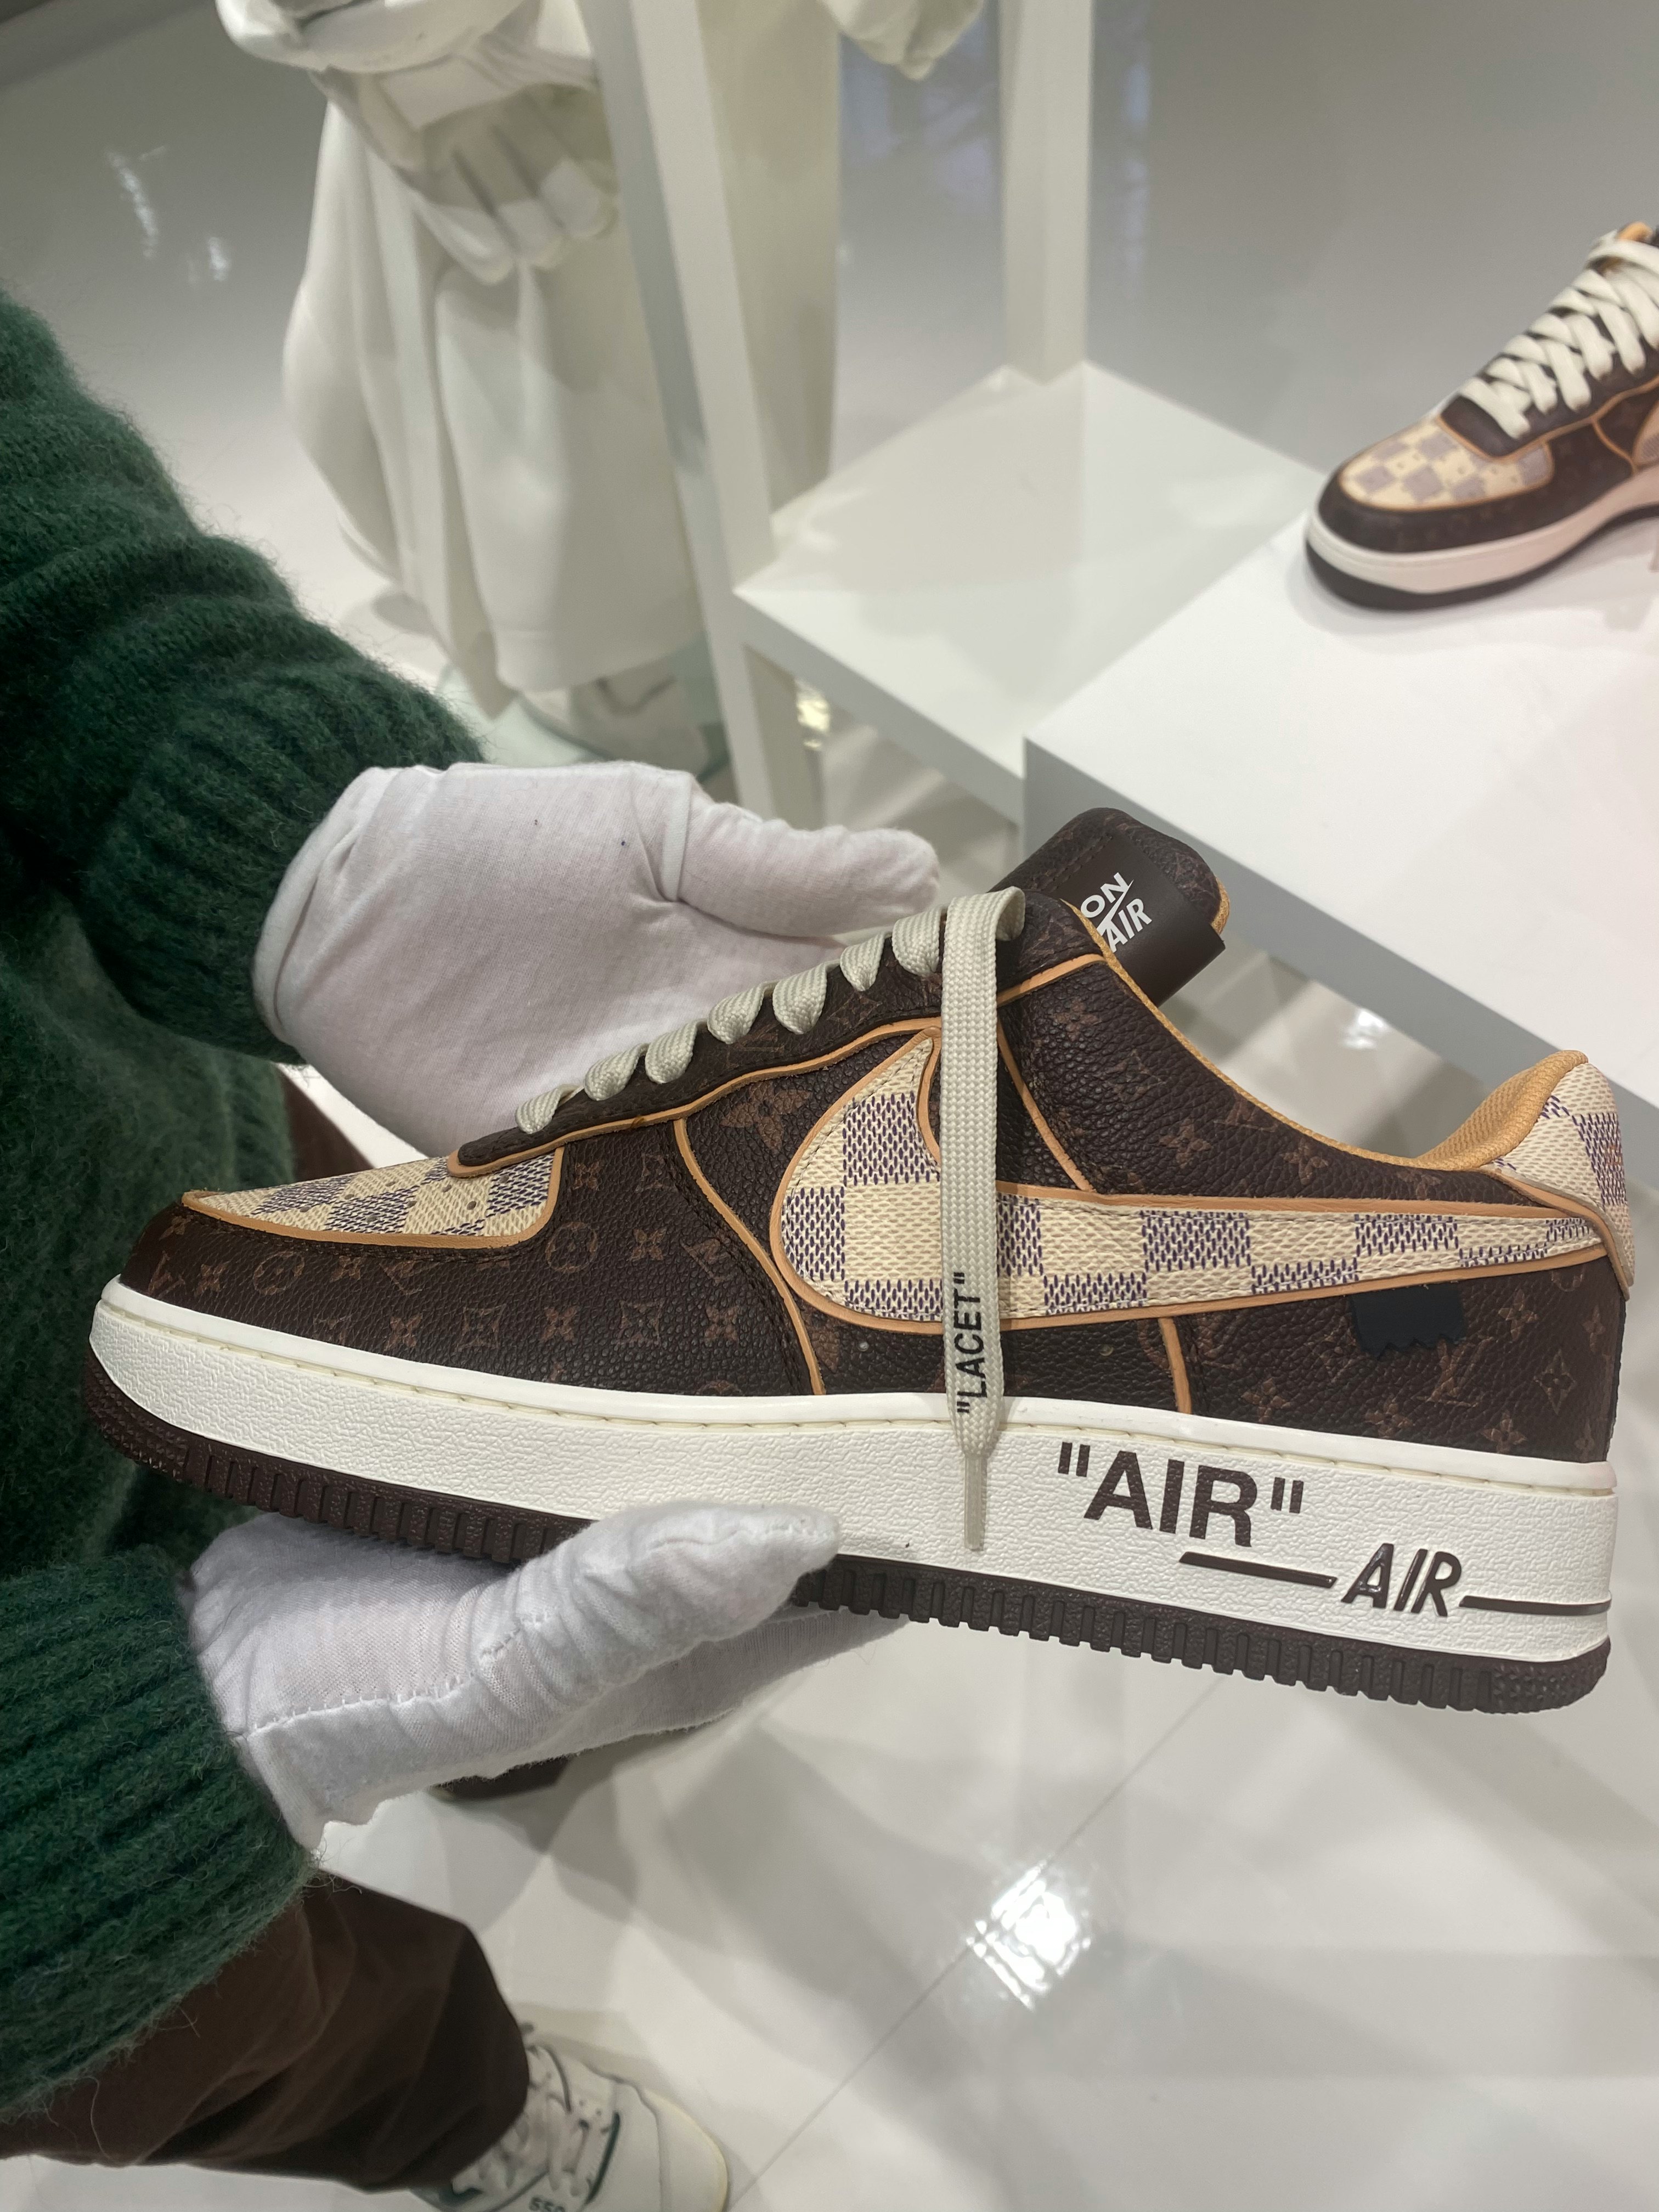 Virgil Abloh Is Bringing the Nike Air Force 1 to Louis Vuitton  GQ